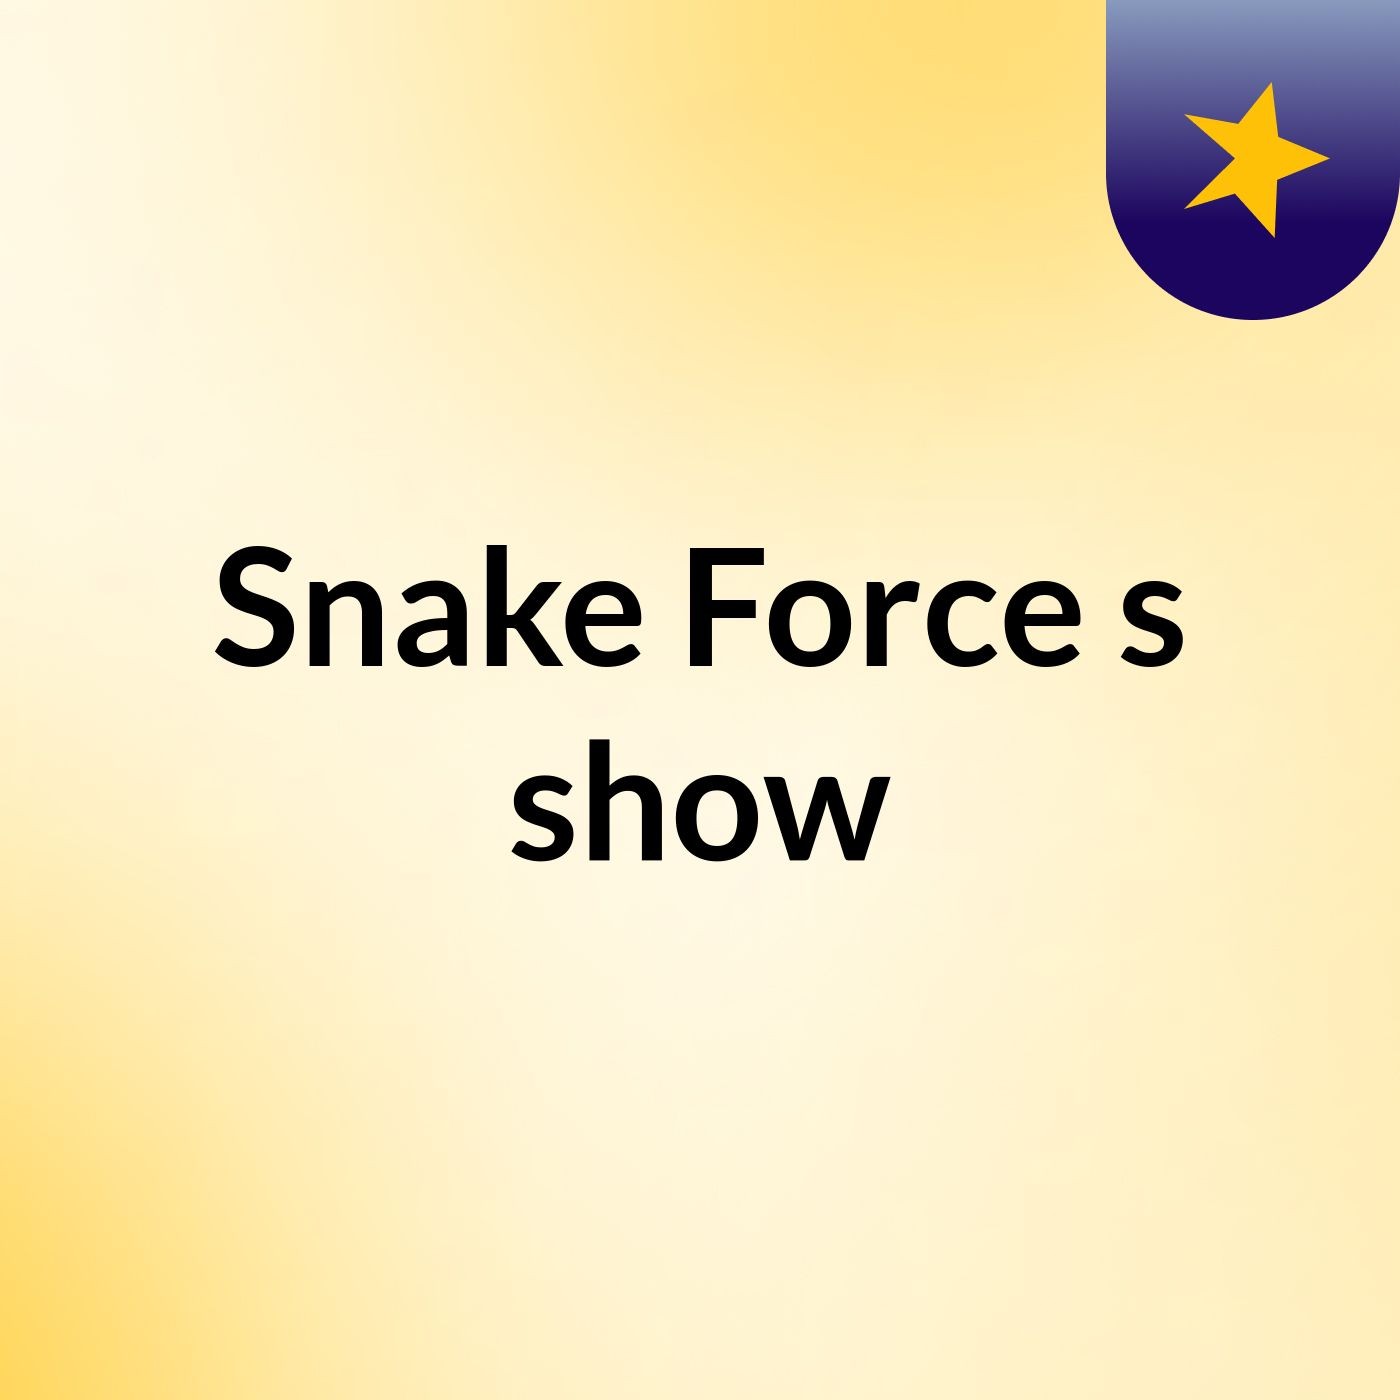 Snake Force's show